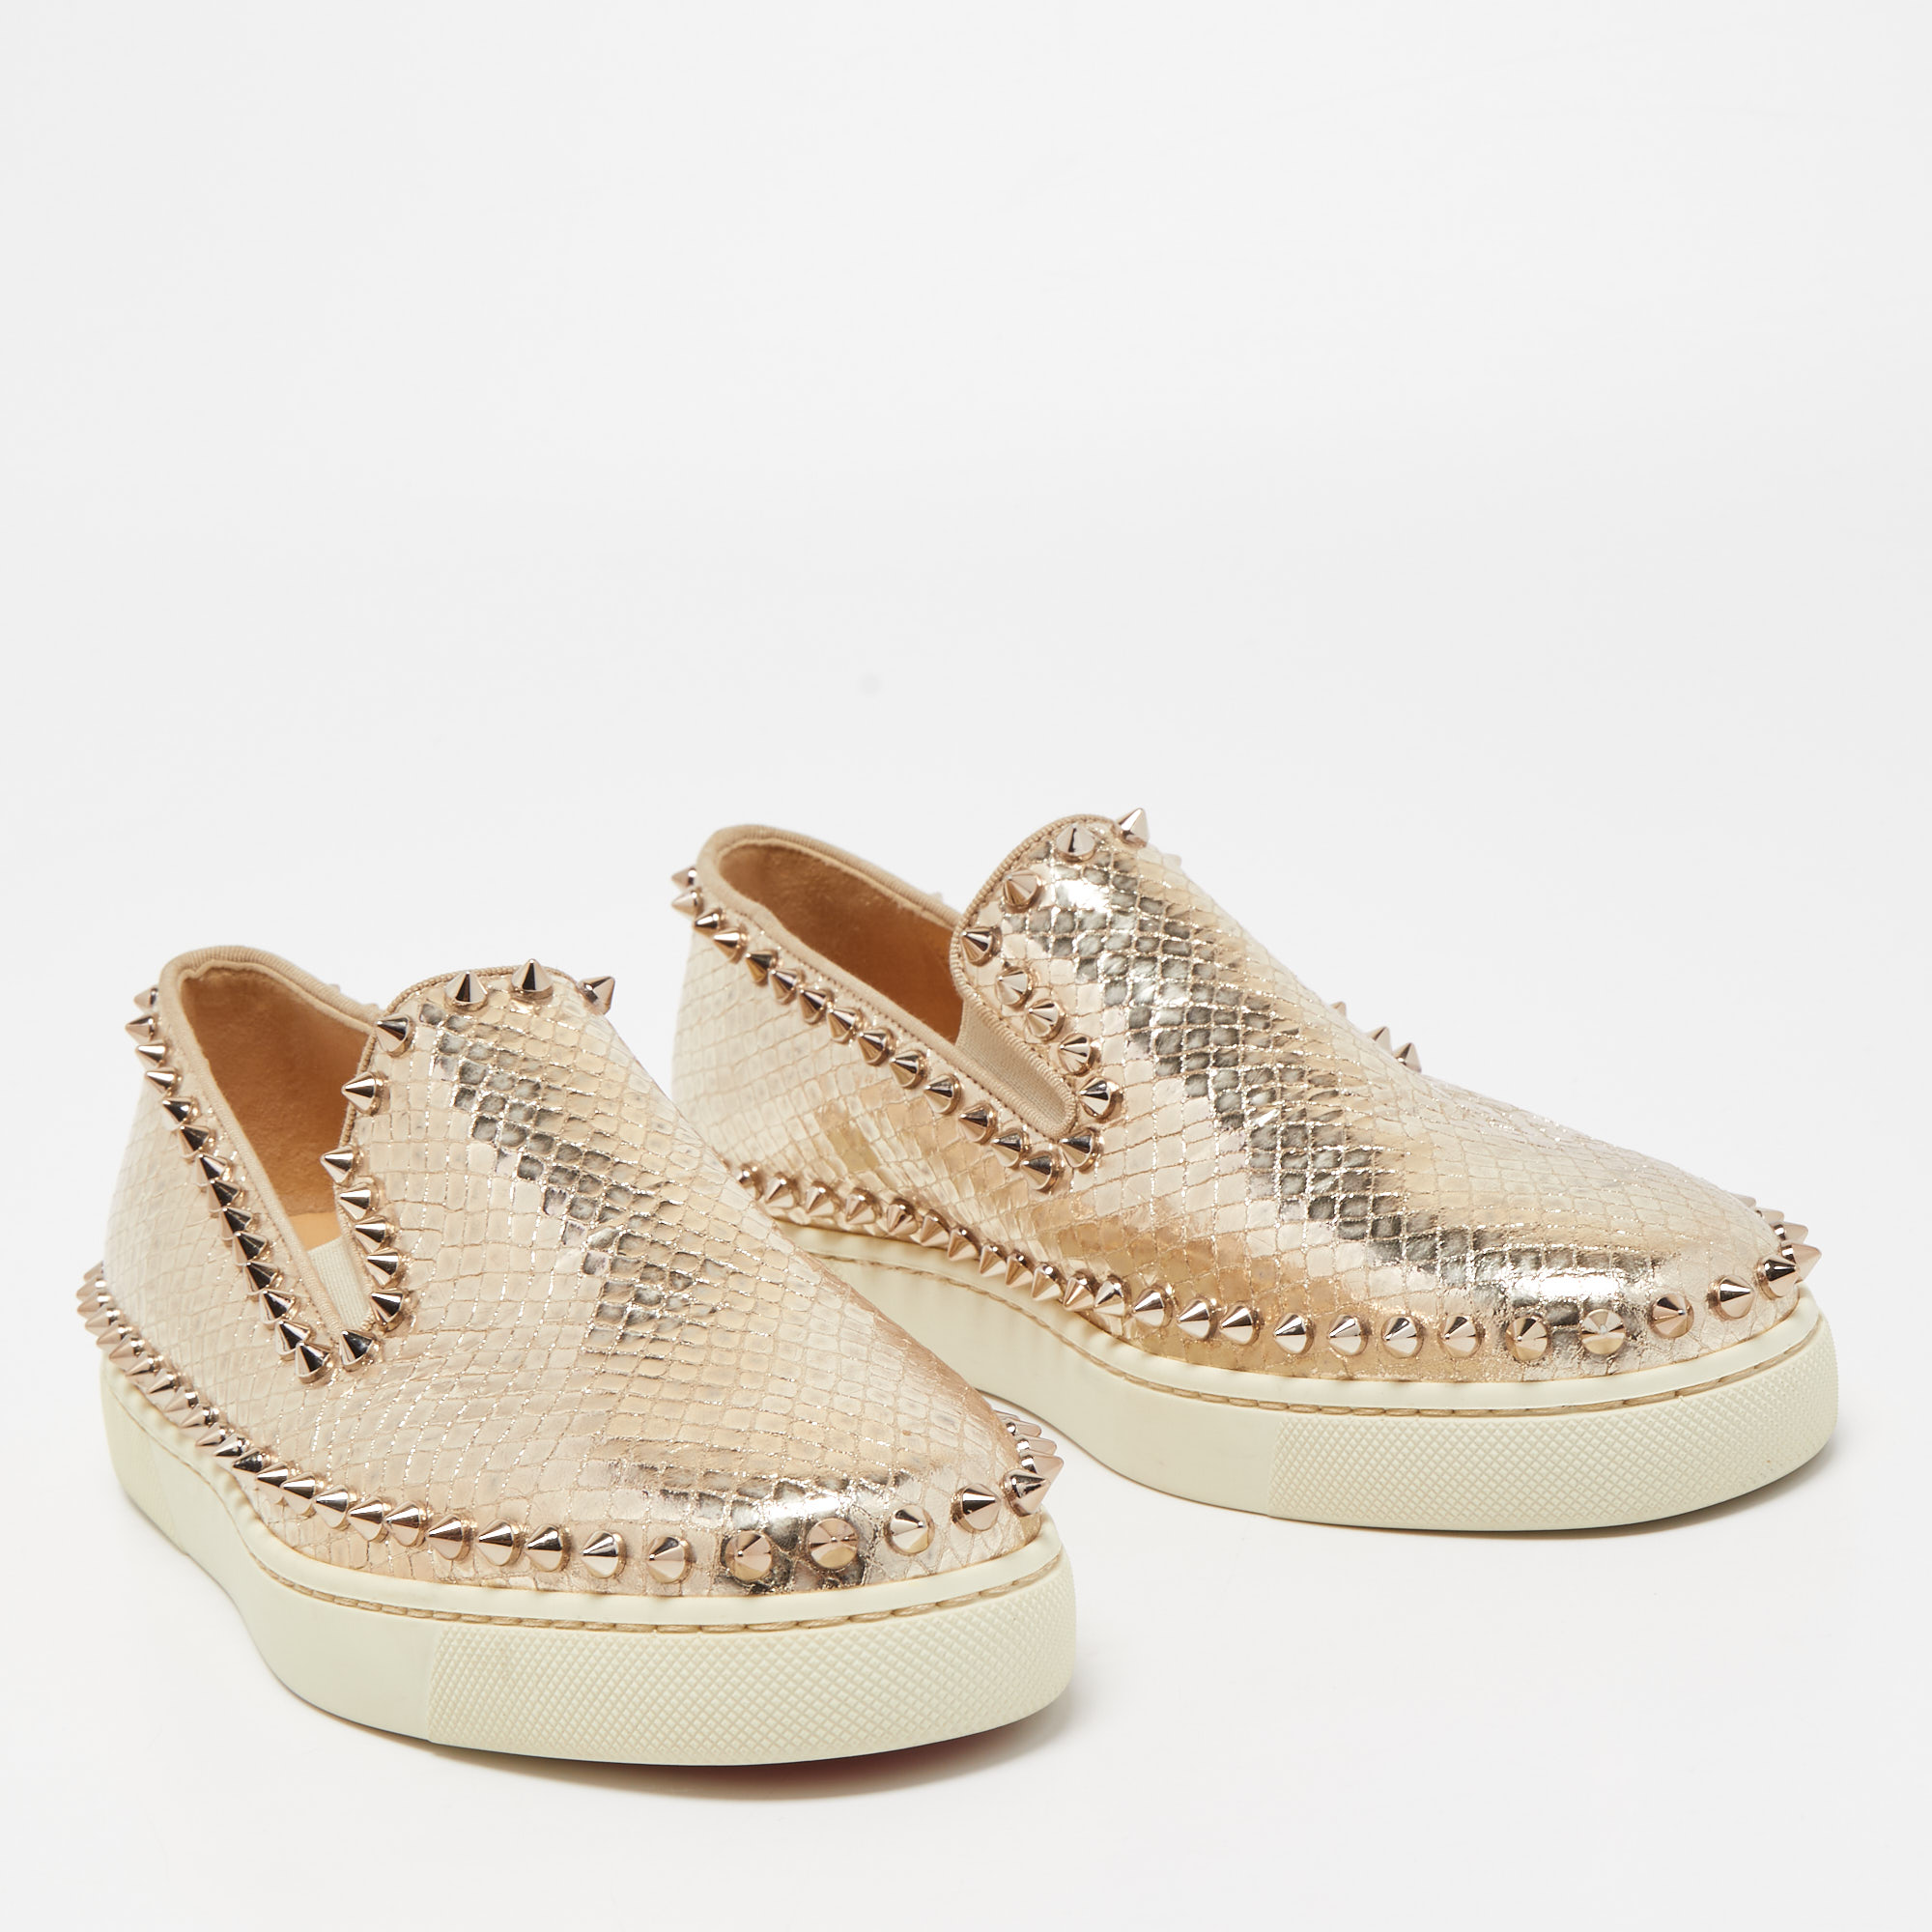 Christian Louboutin Gold Python Embossed Leather Spike Pik Boat Sneakers Size 37.5